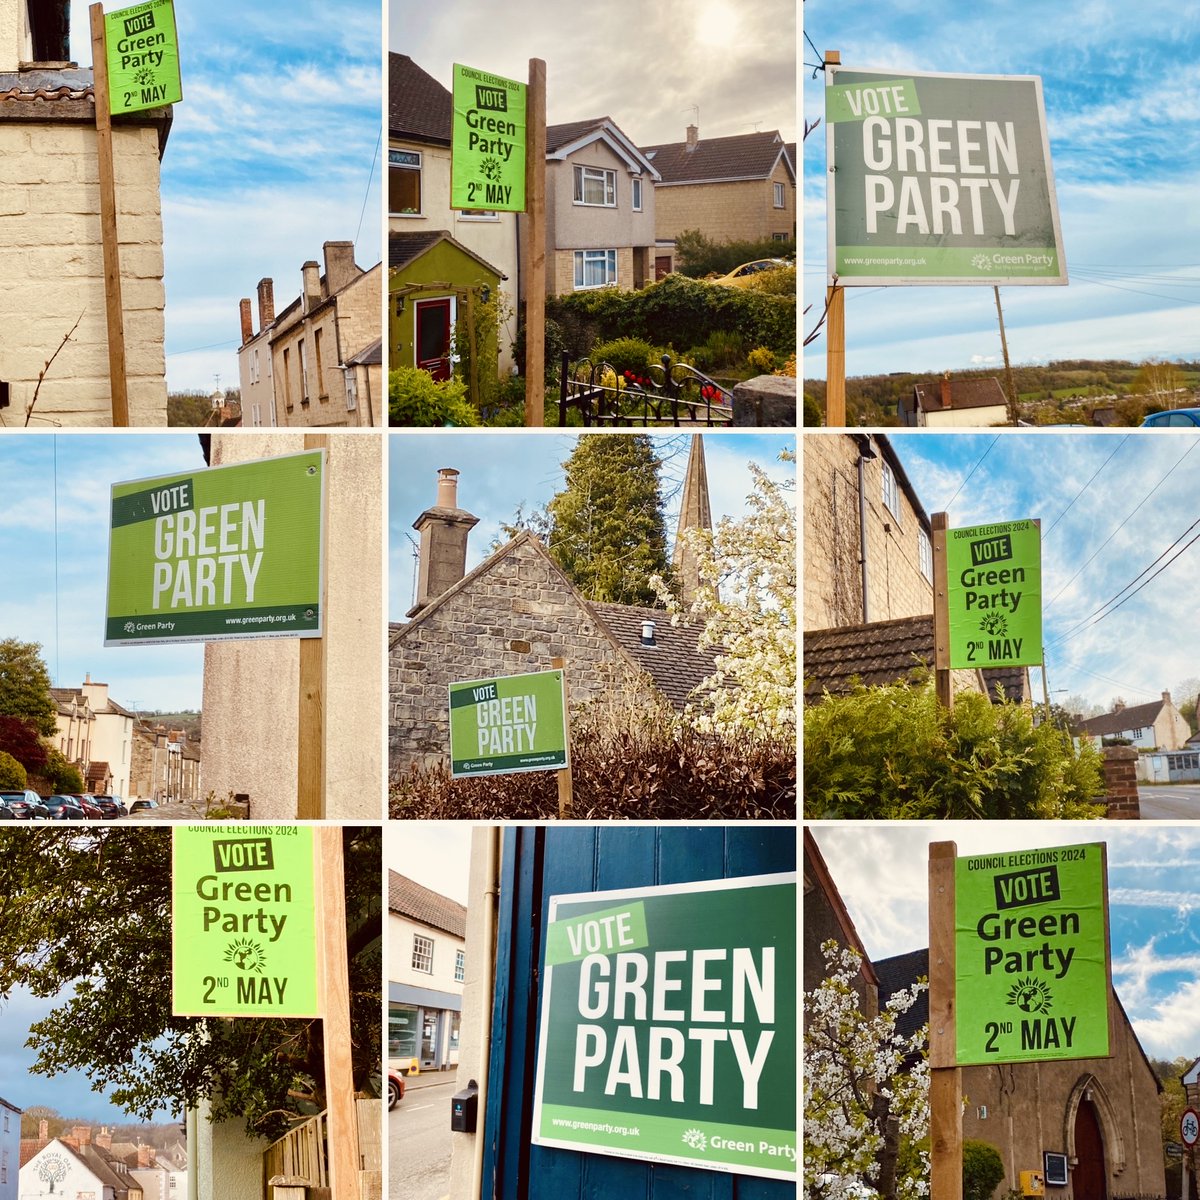 It's very cheering to see so many Vote Green boards appearing across the Wotton-under-Edge ward, ahead of the local elections. With so many candidates to choose from, every vote counts! There's still time to register to vote / apply for a postal vote: stroud.gov.uk/council-and-de…